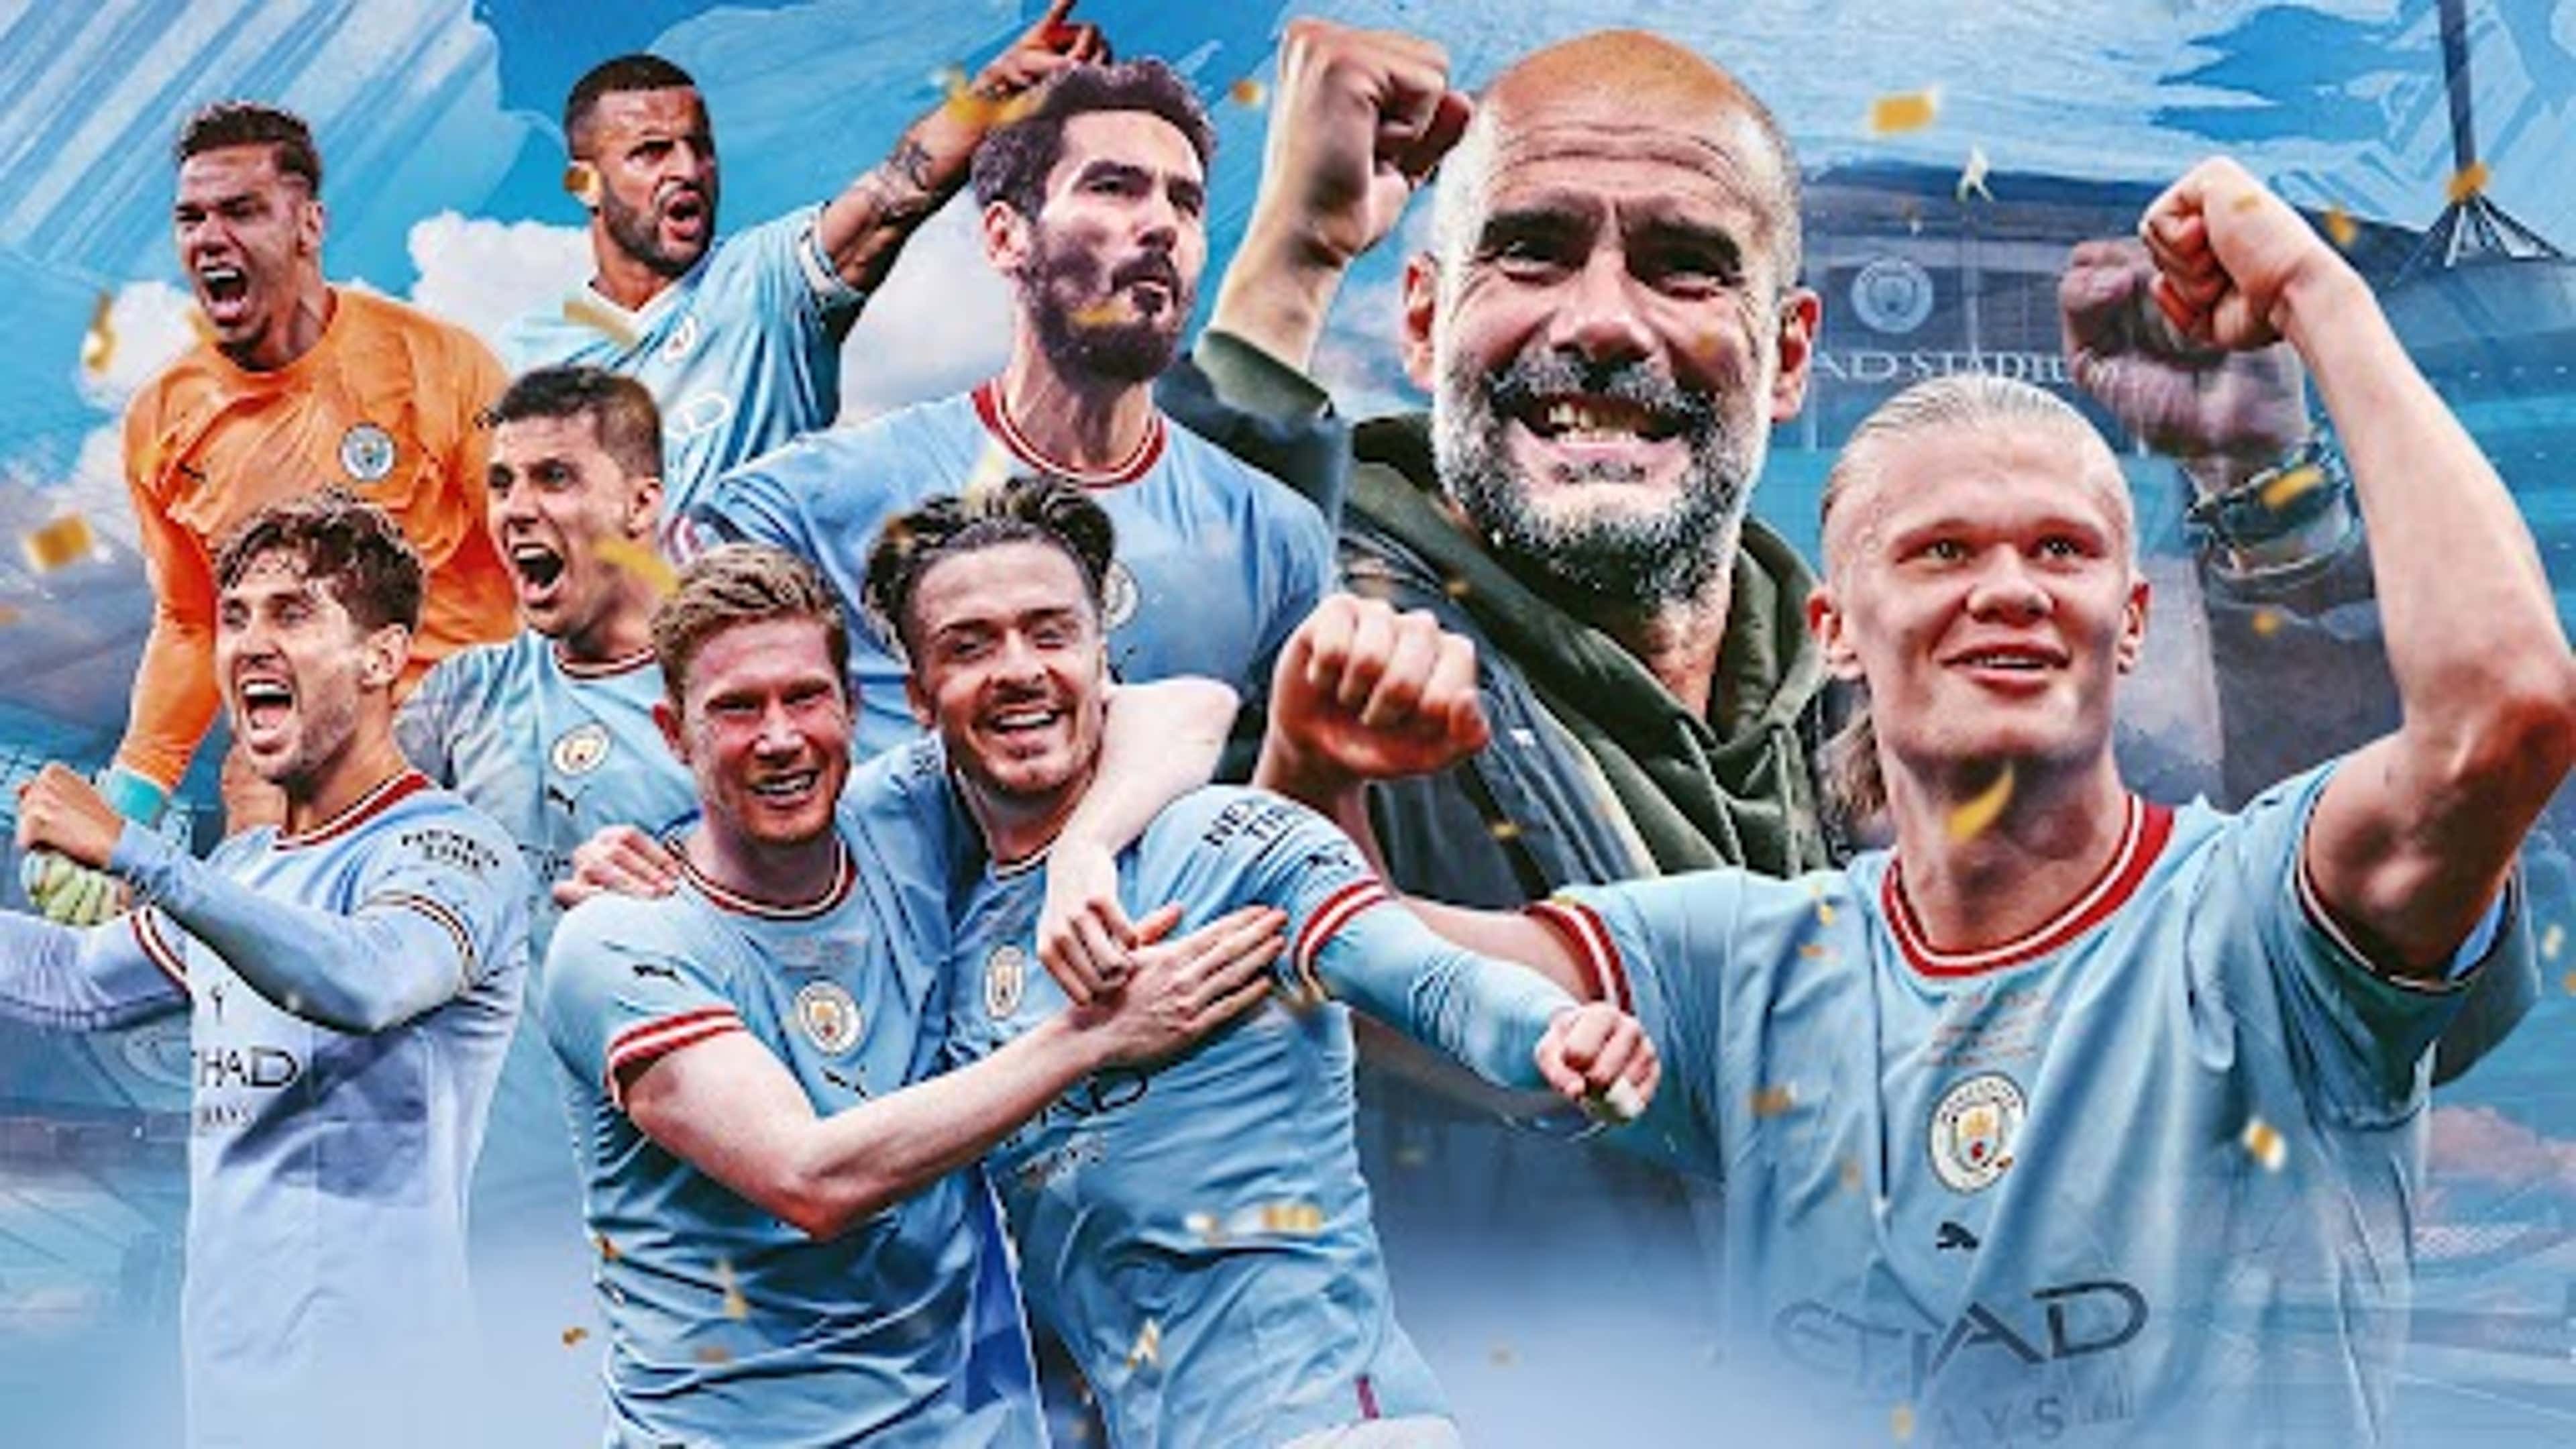 Ten facts about Manchester City's Champions League opponents